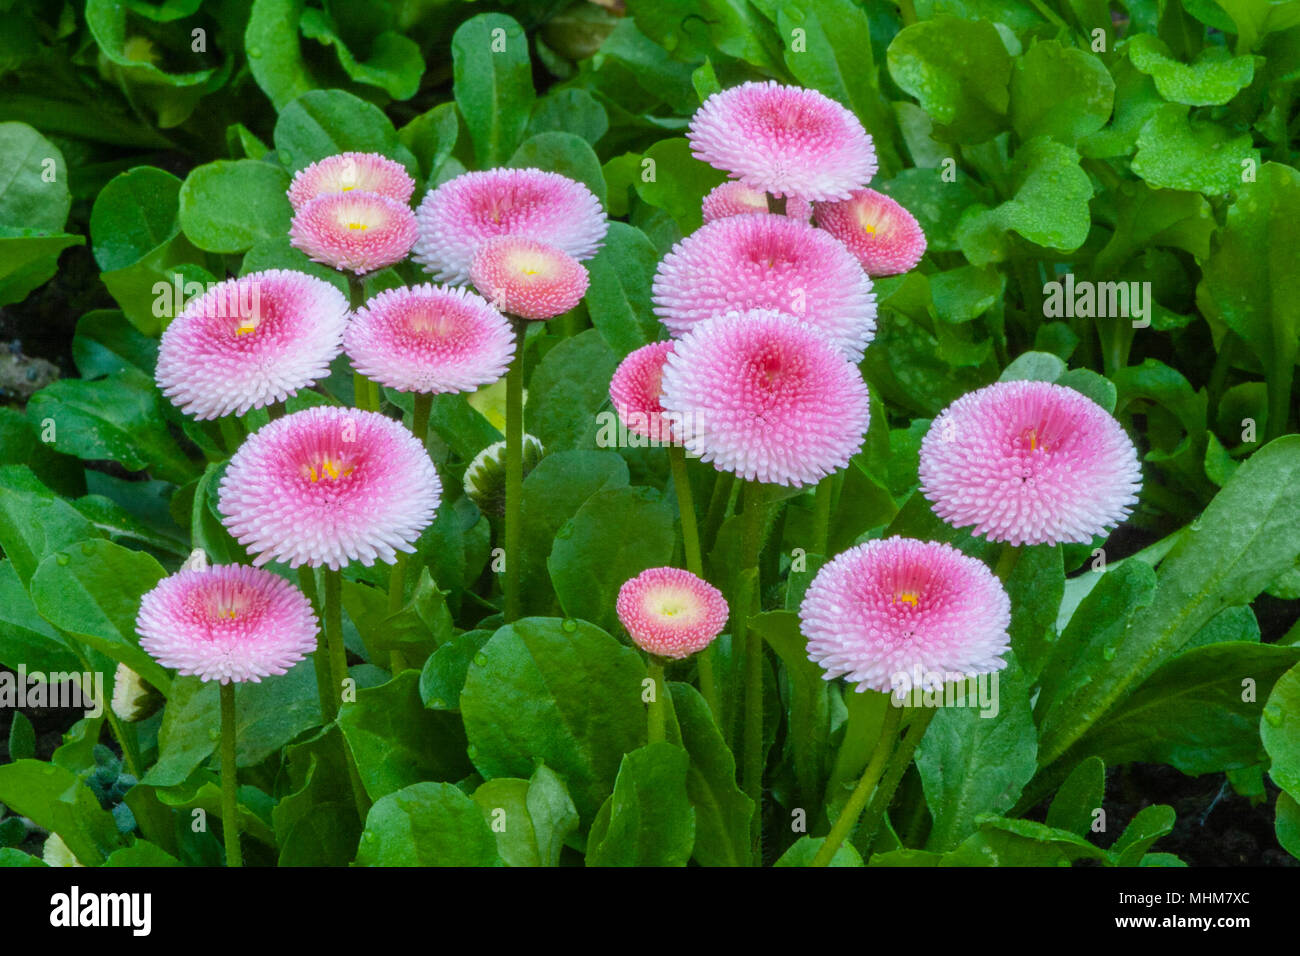 English Daisy, Bellis perennis 'Pomponette', at Butchart Gardens in Victoria, British Columbia, Canada. Stock Photo